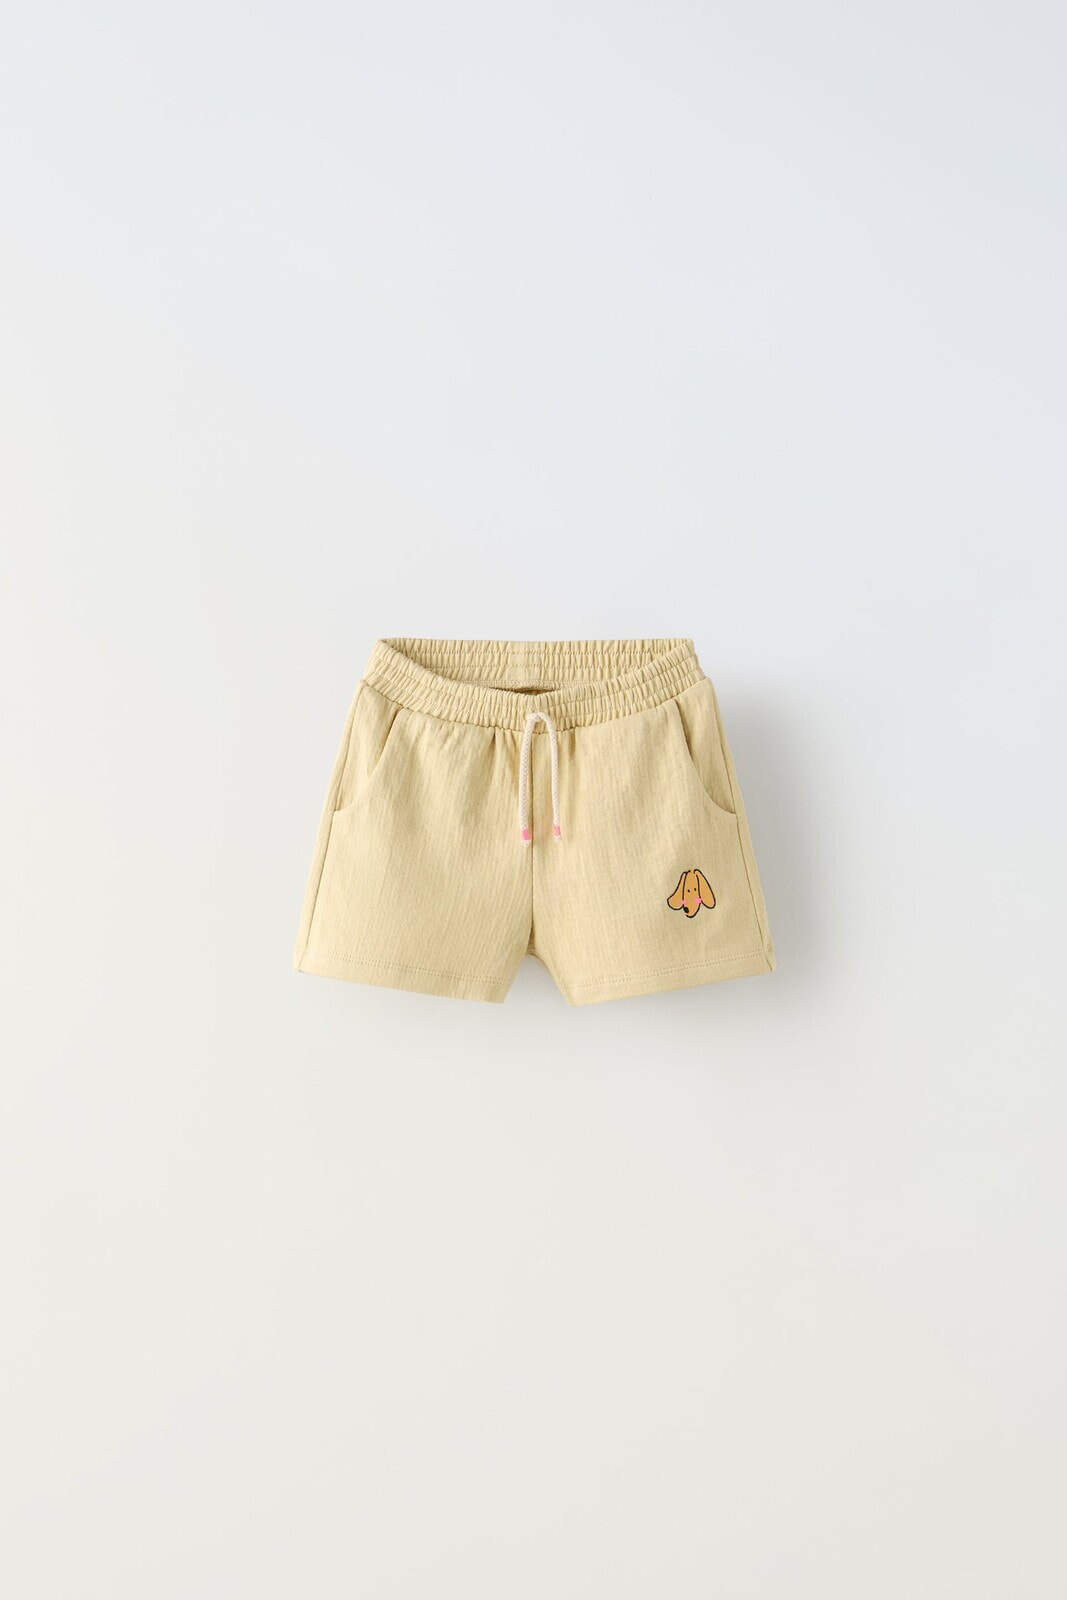 Plush bermuda shorts with embroidery